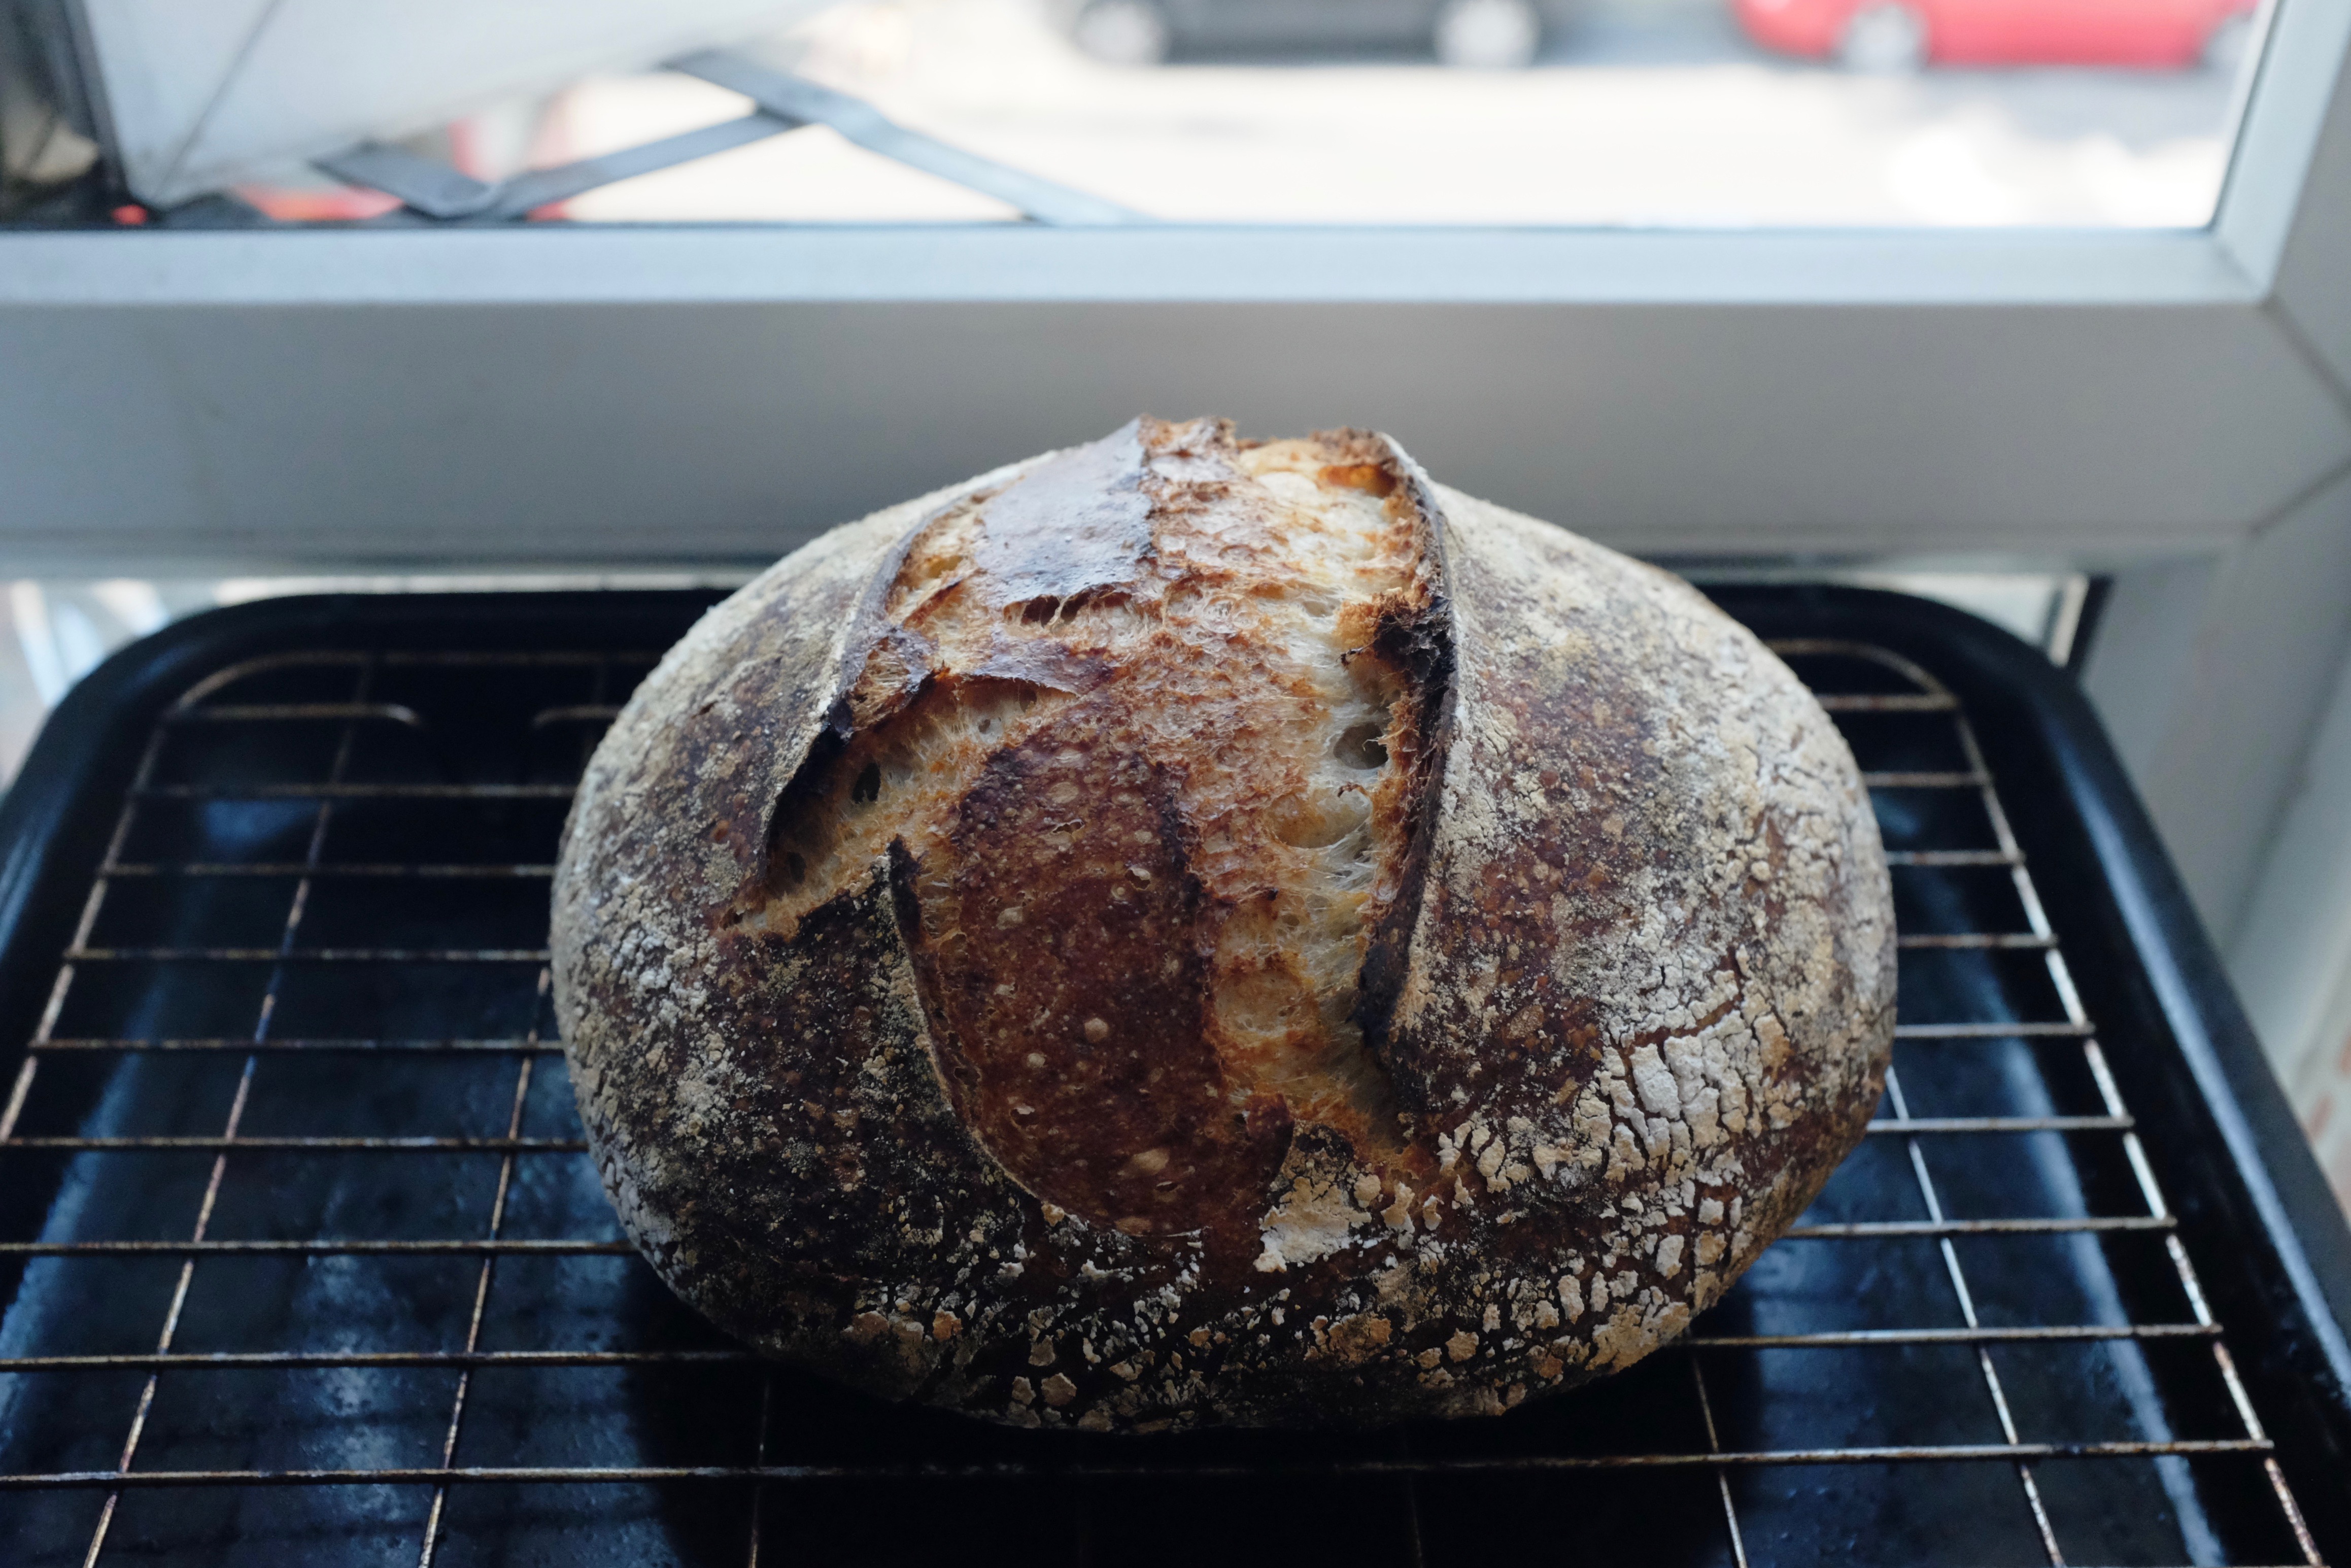 An image of a bread called “Tartine Country Bread”